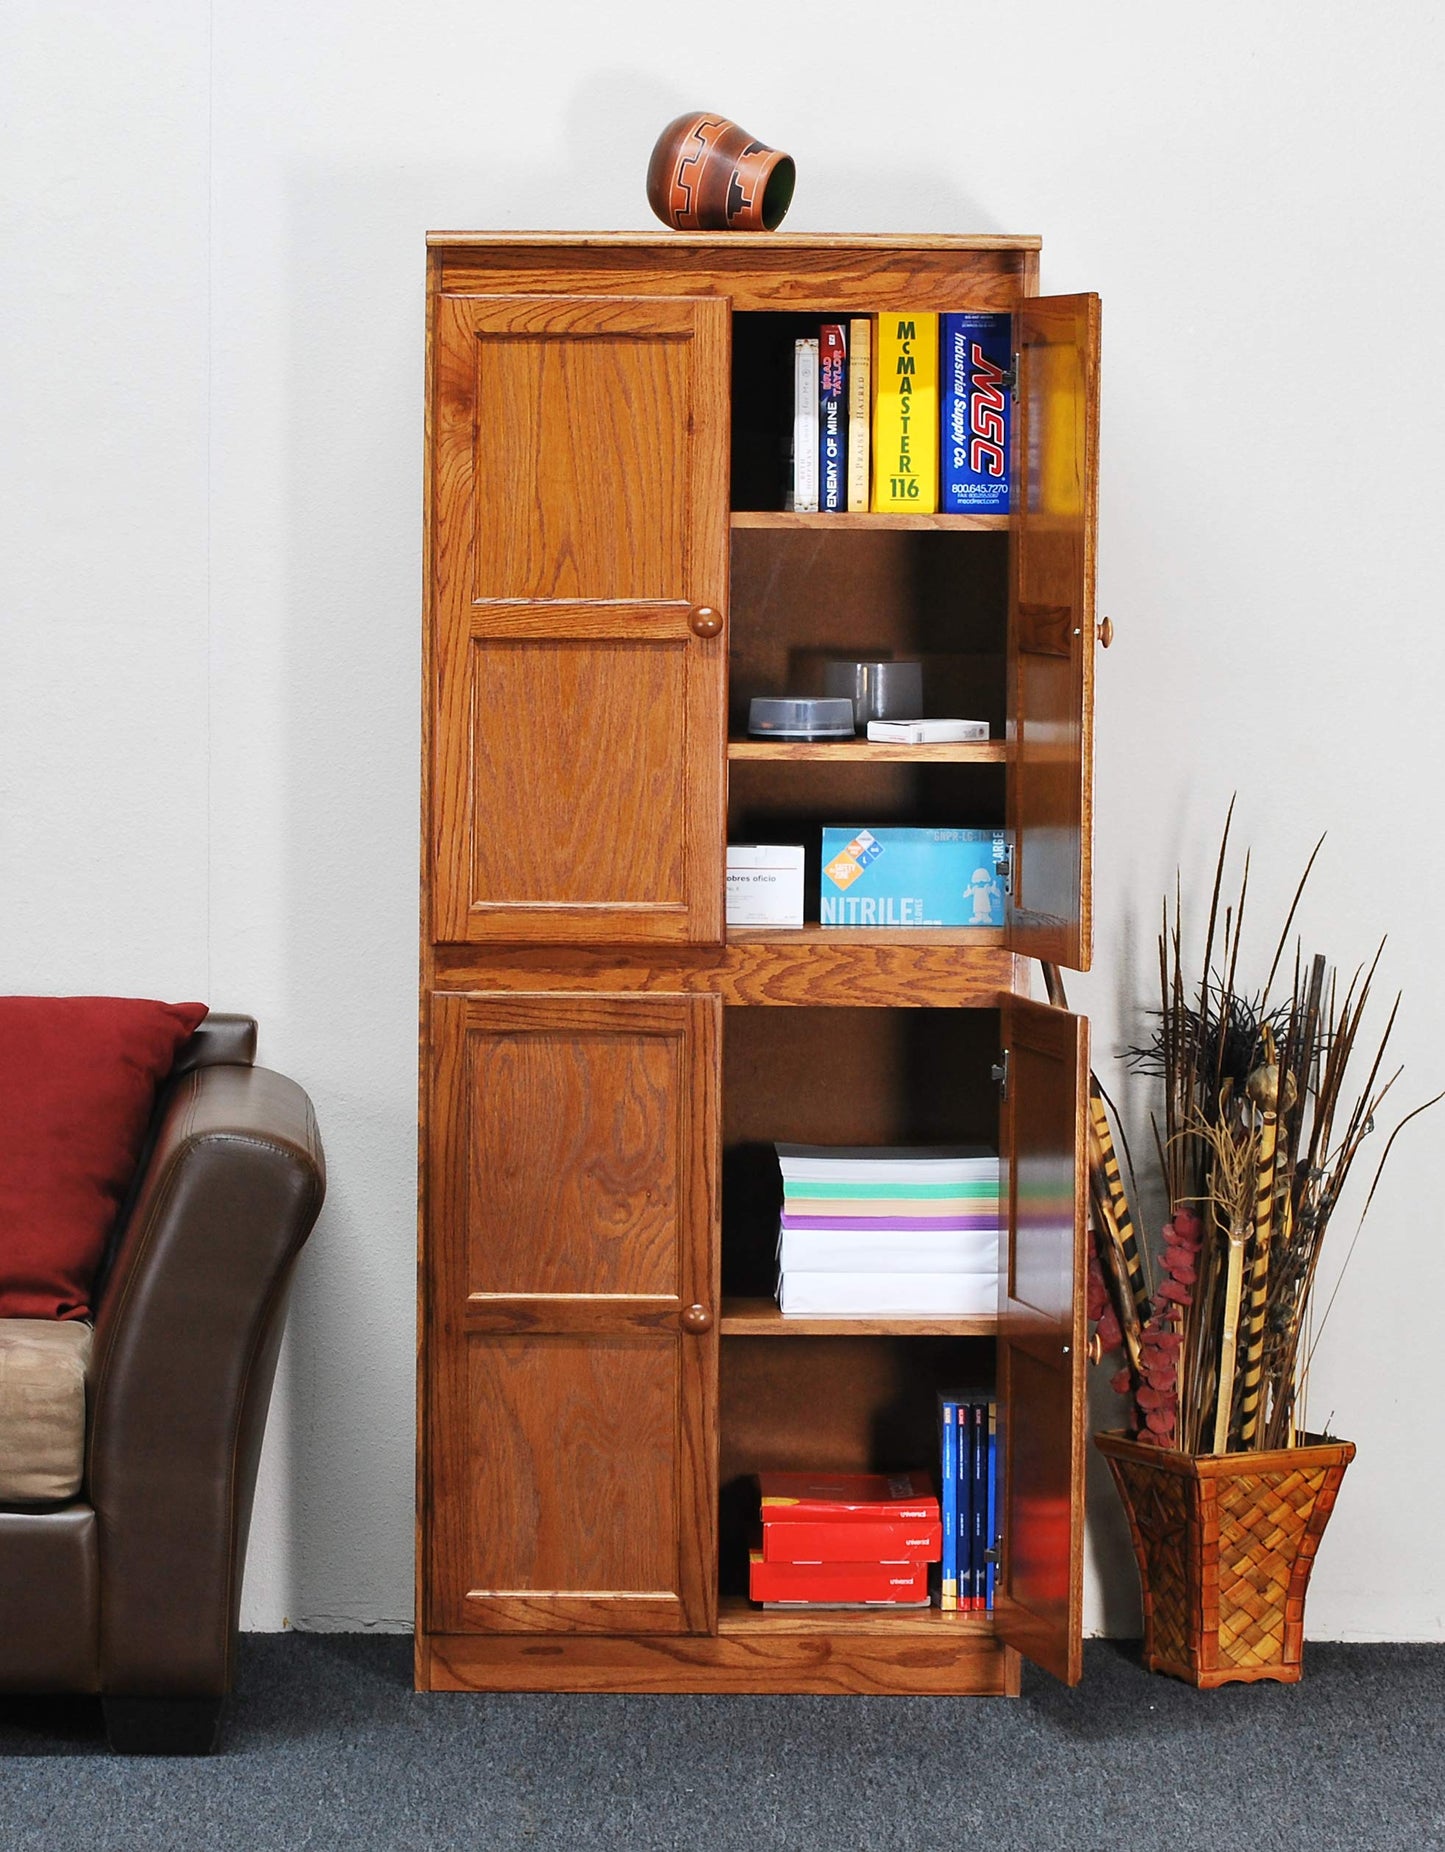 Traditional 72" Wood Storage Cabinet with 5-Shelves in Dry Oak